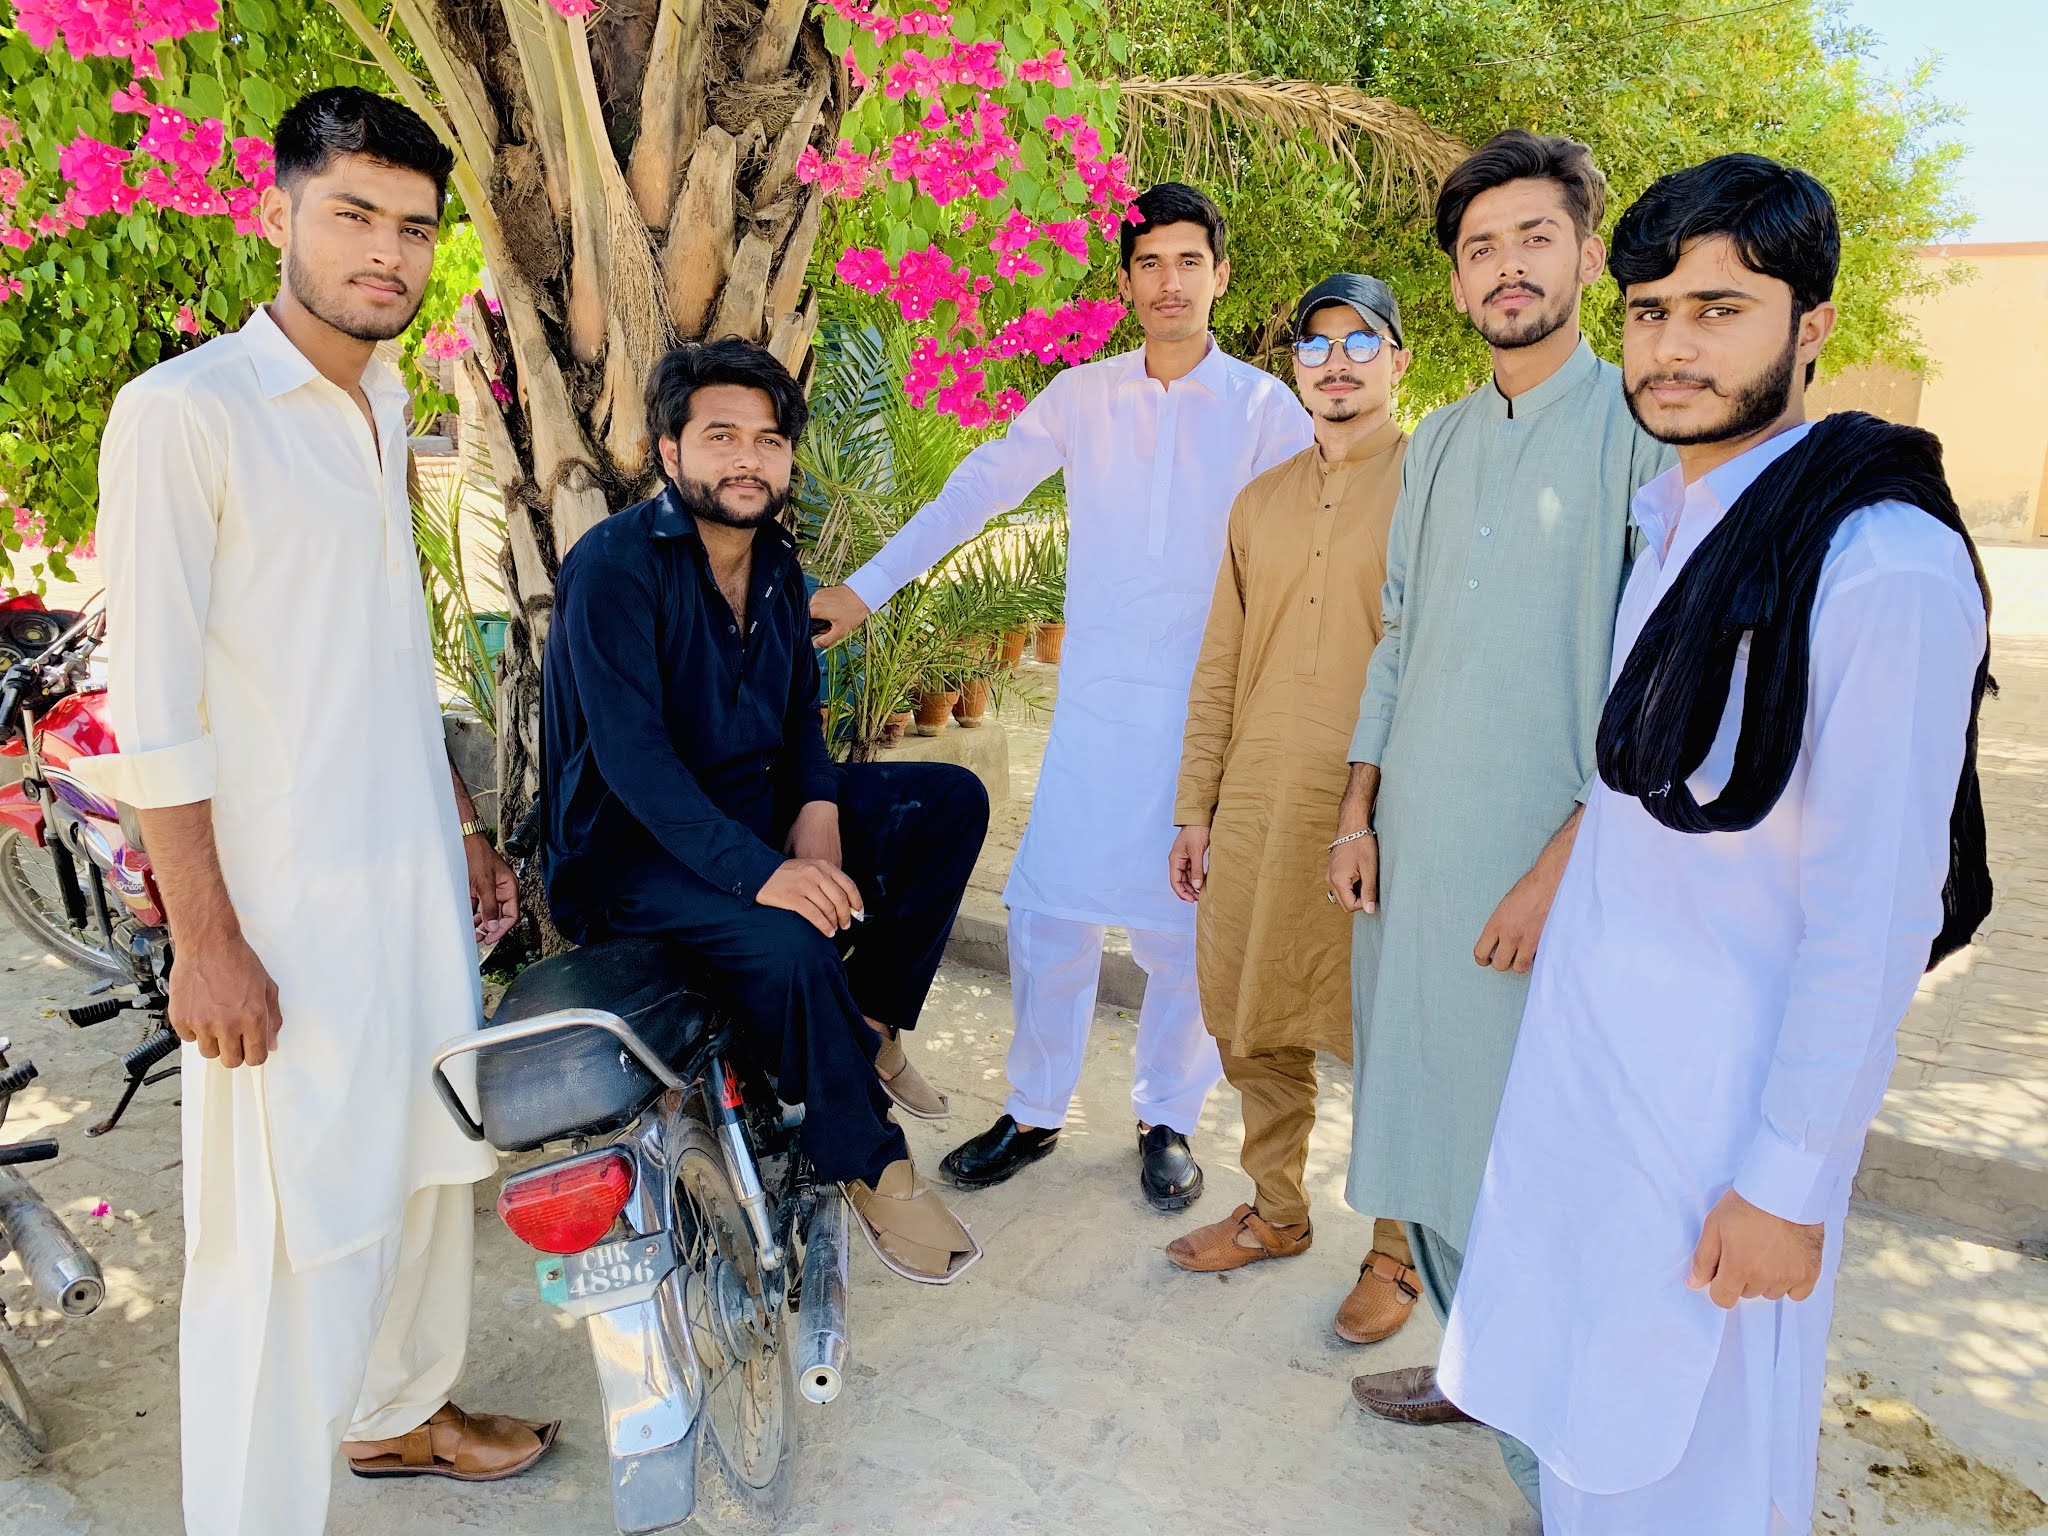 007 Group Chakwal on Eid Day 2019 Images at Mulhal Mughlan